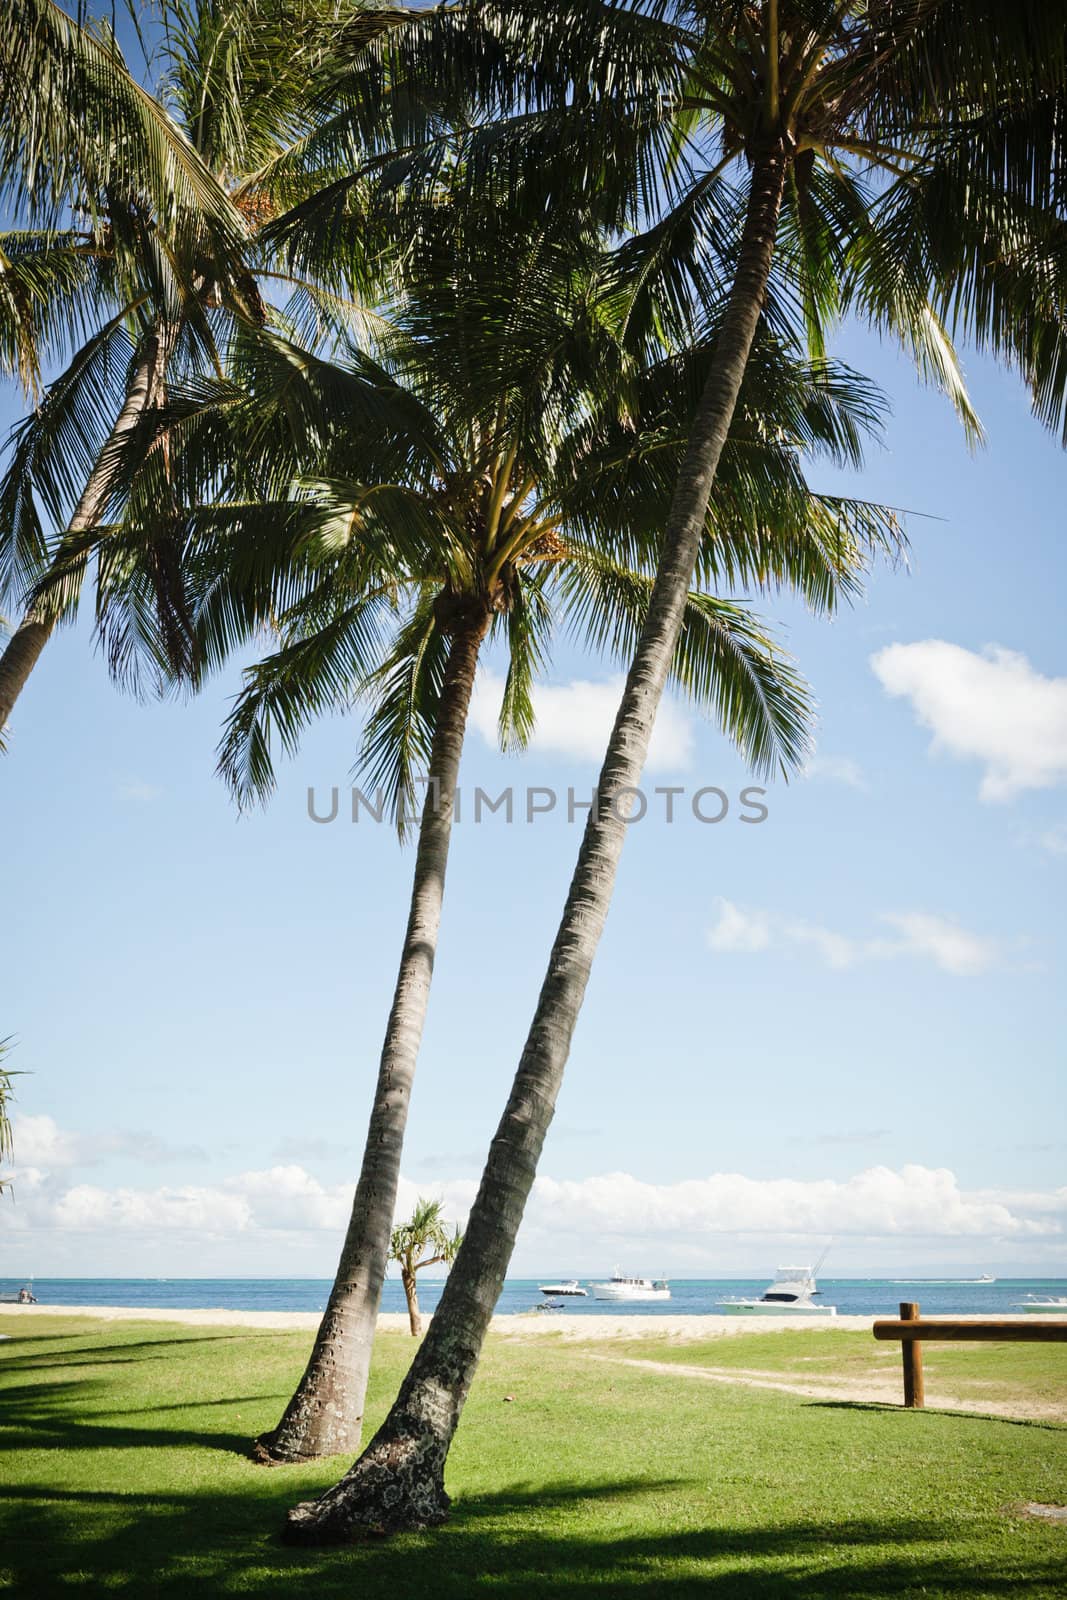 Palm trees growing on a deserted green lawn on a tropical beachfront overlooking the ocean with moored luxury pleasure boats